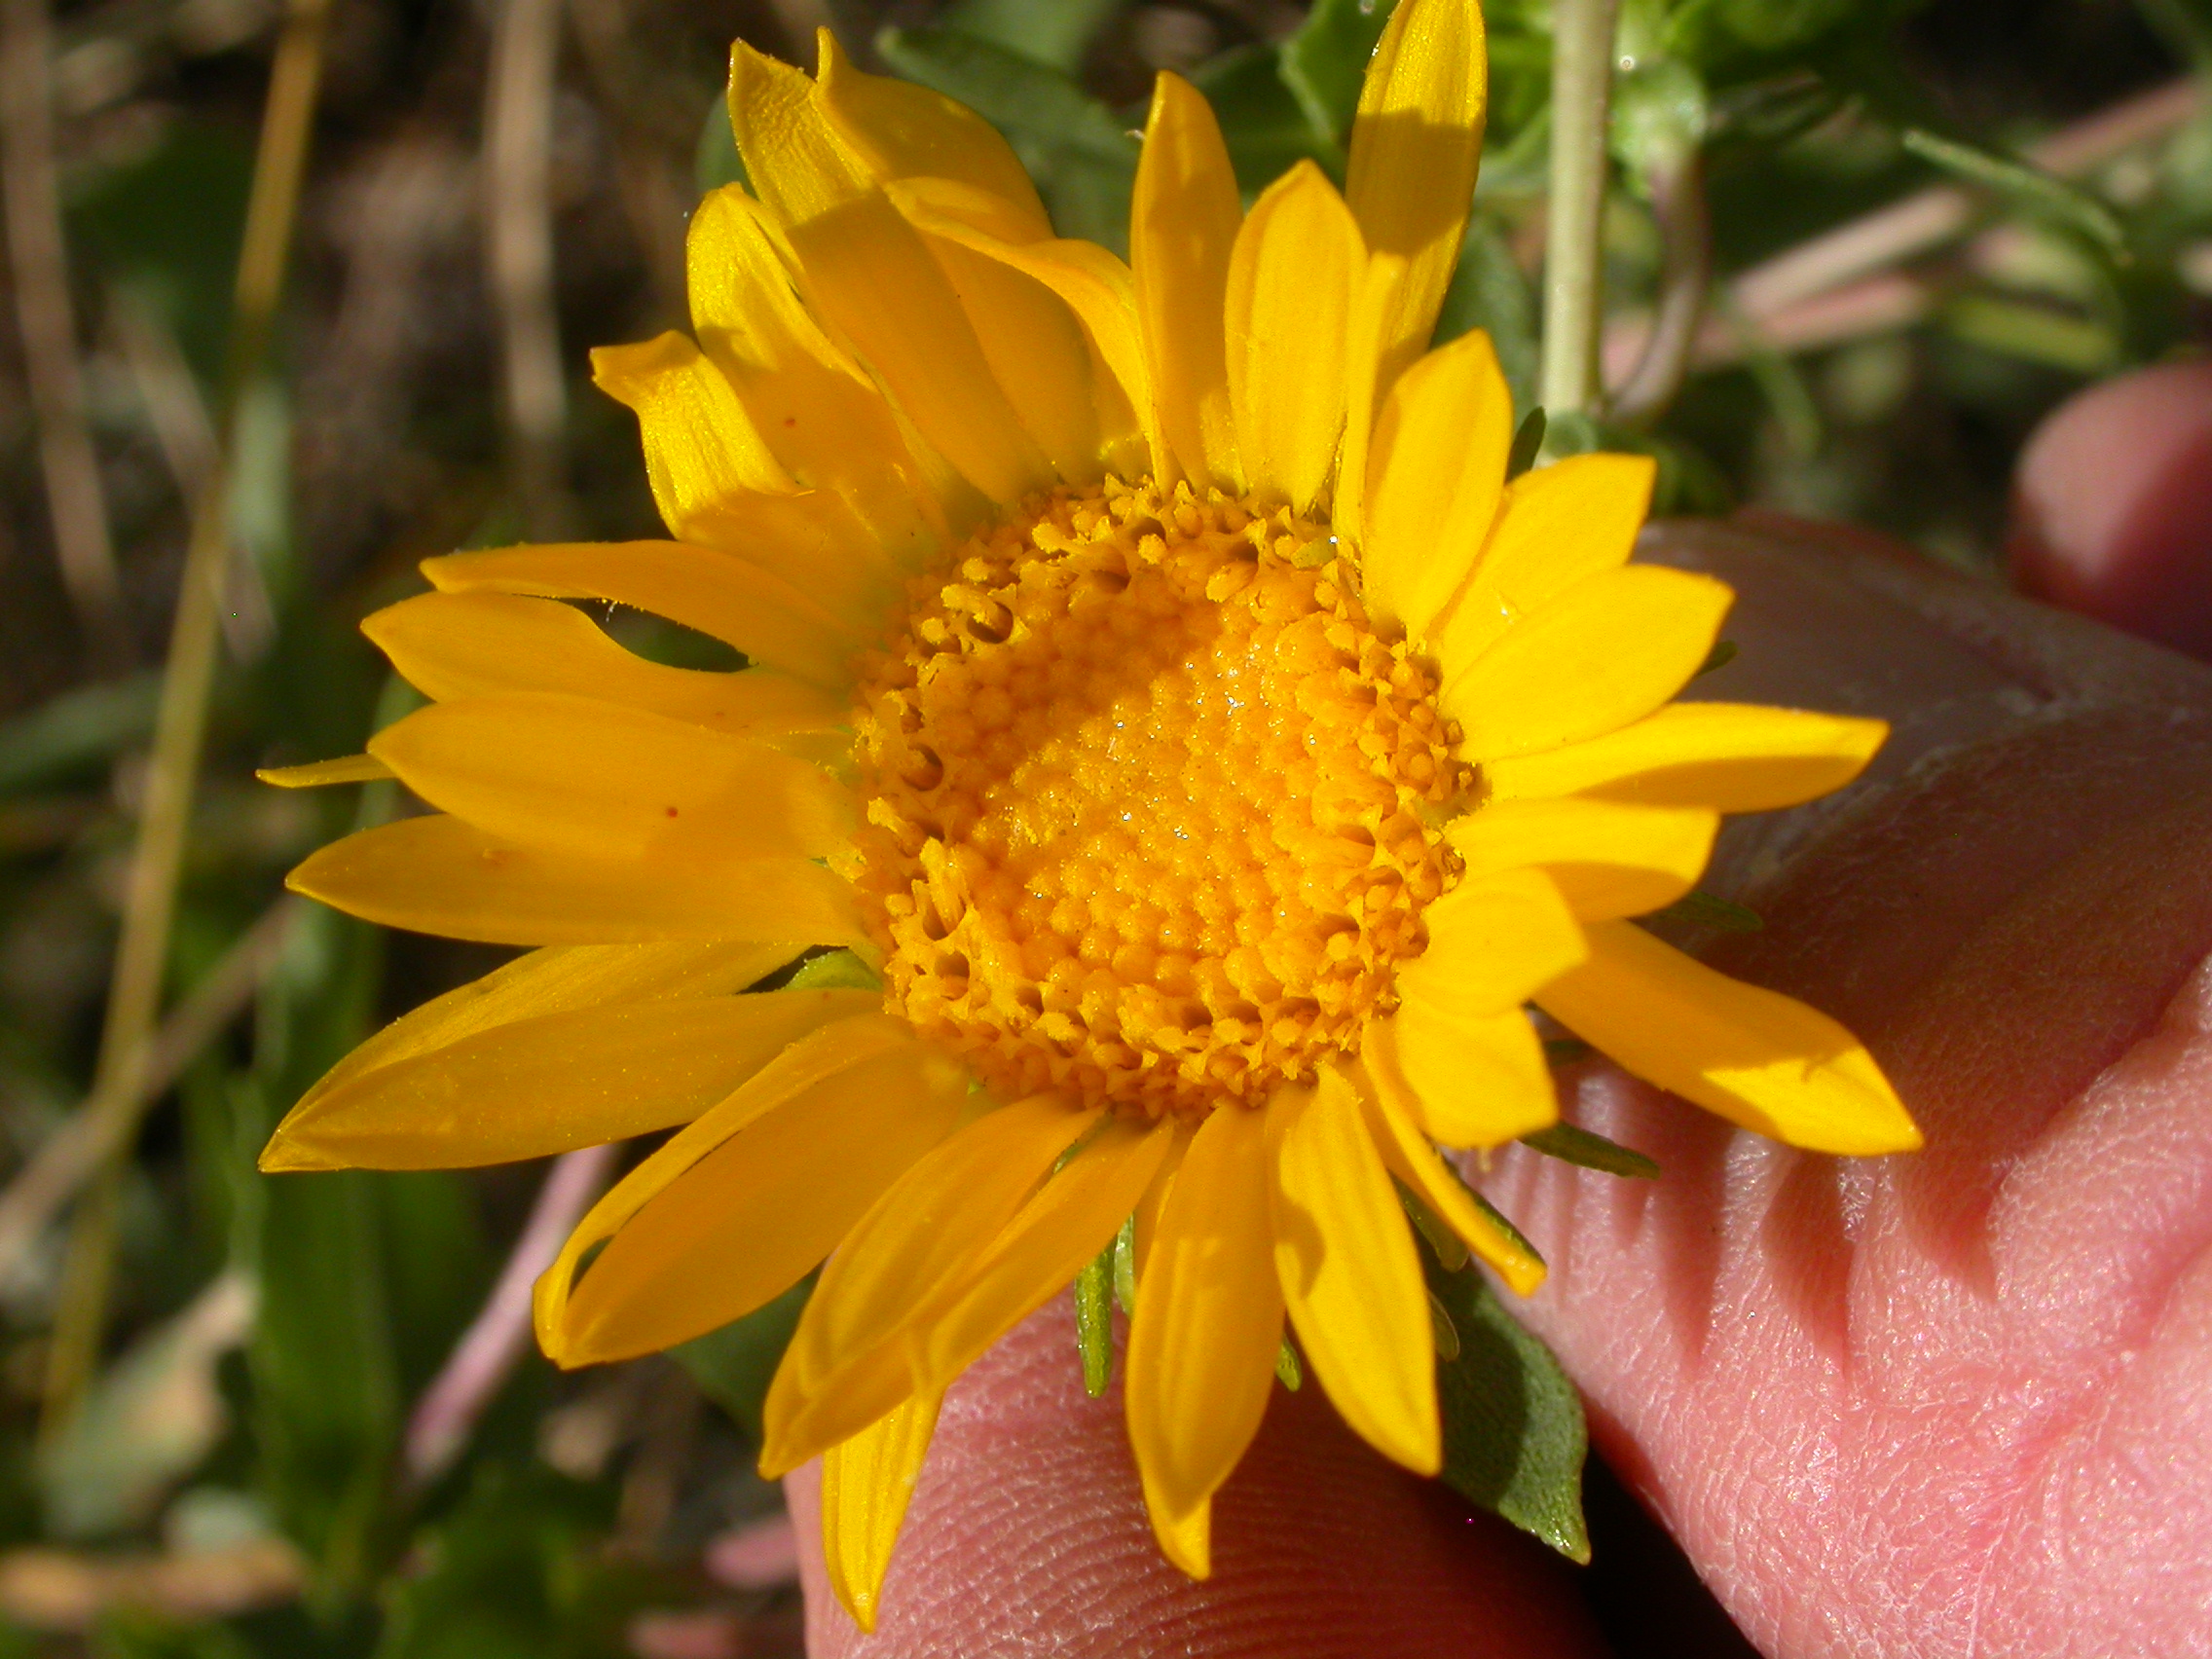 Flower with yellow rays and yellow disk flowers